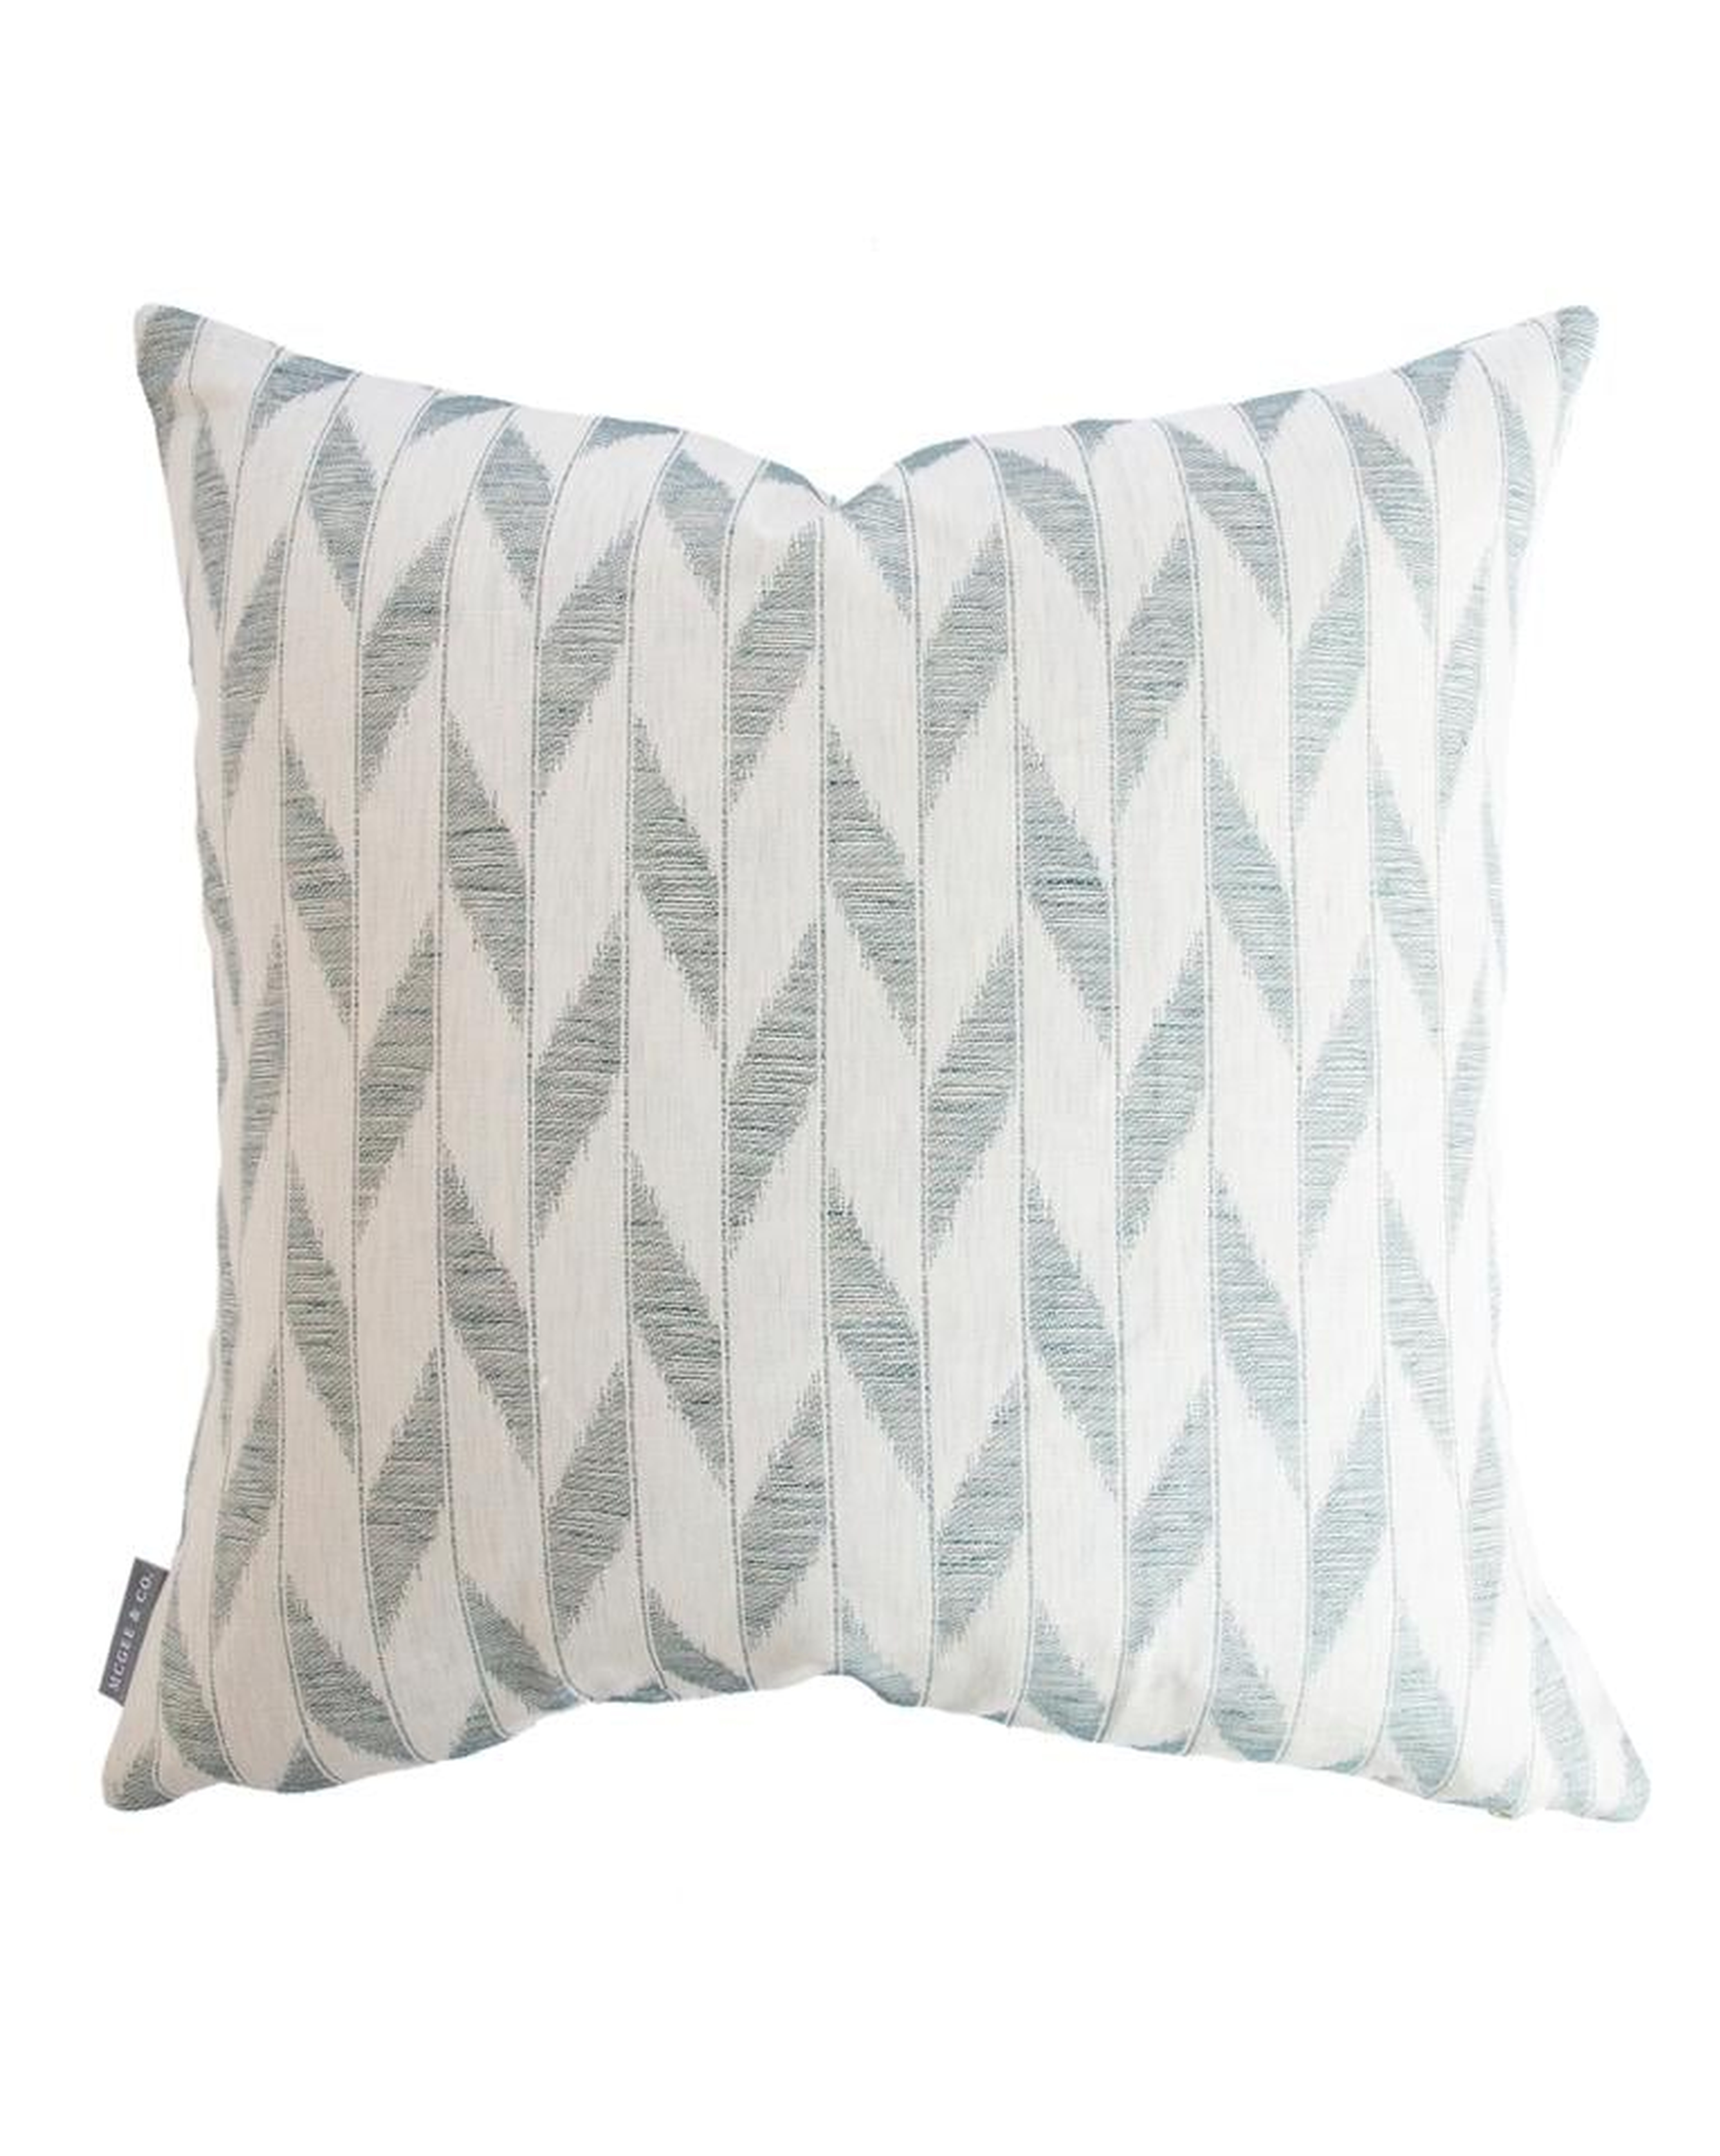 FLORENCE PILLOW WITHOUT INSERT, 22" x 22" - McGee & Co.